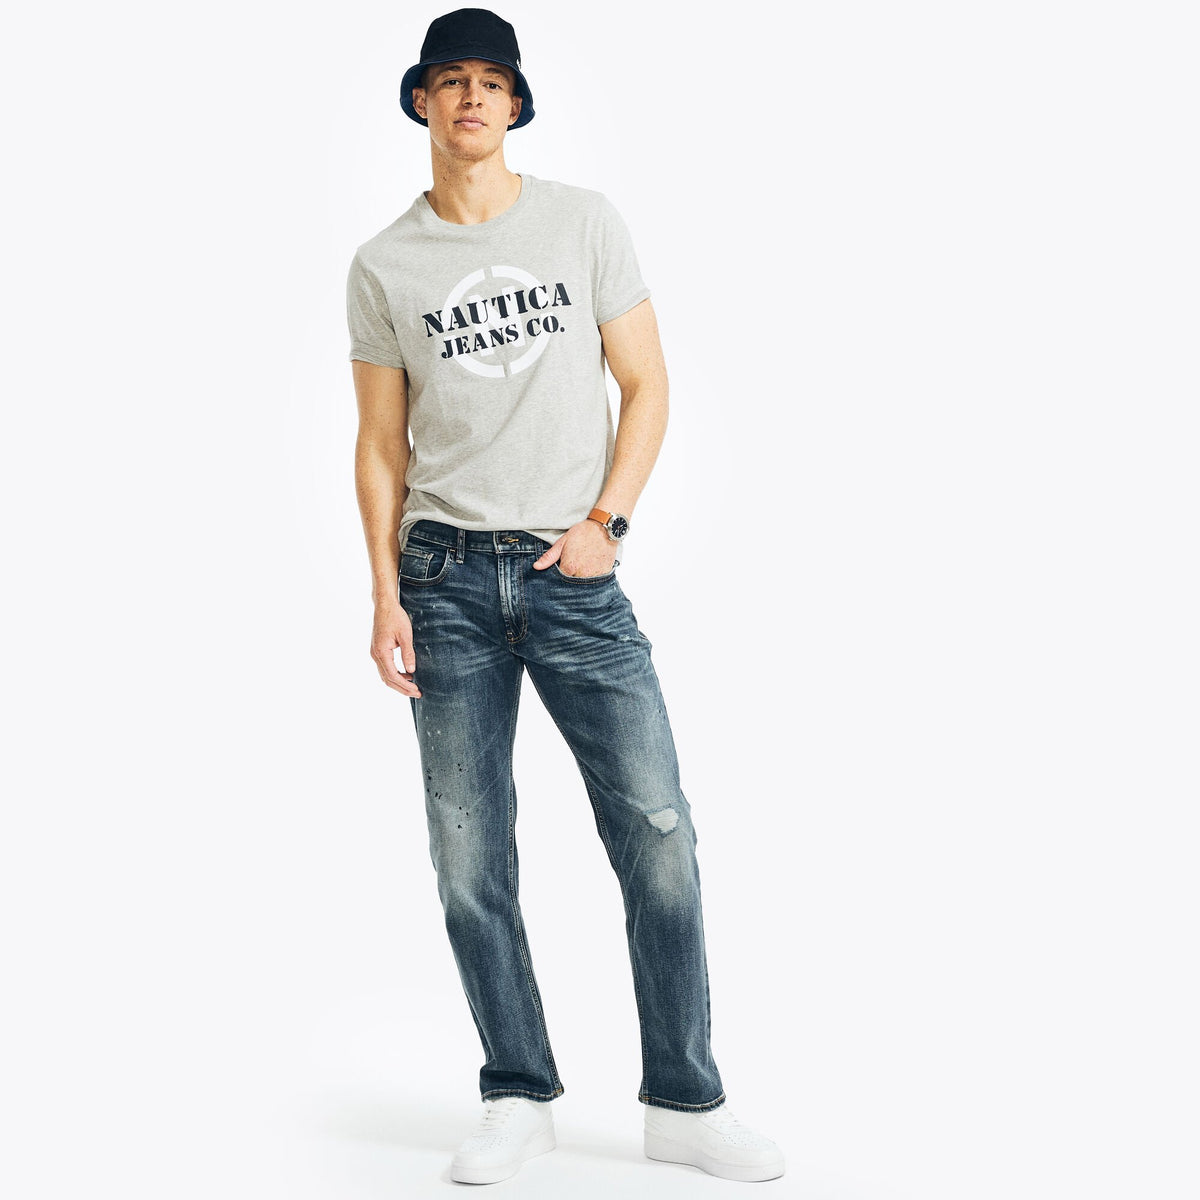 Nautica Men's Nautica Jeans Co. Sustainably Crafted Distressed Relaxed Fit Denim Angel Blue